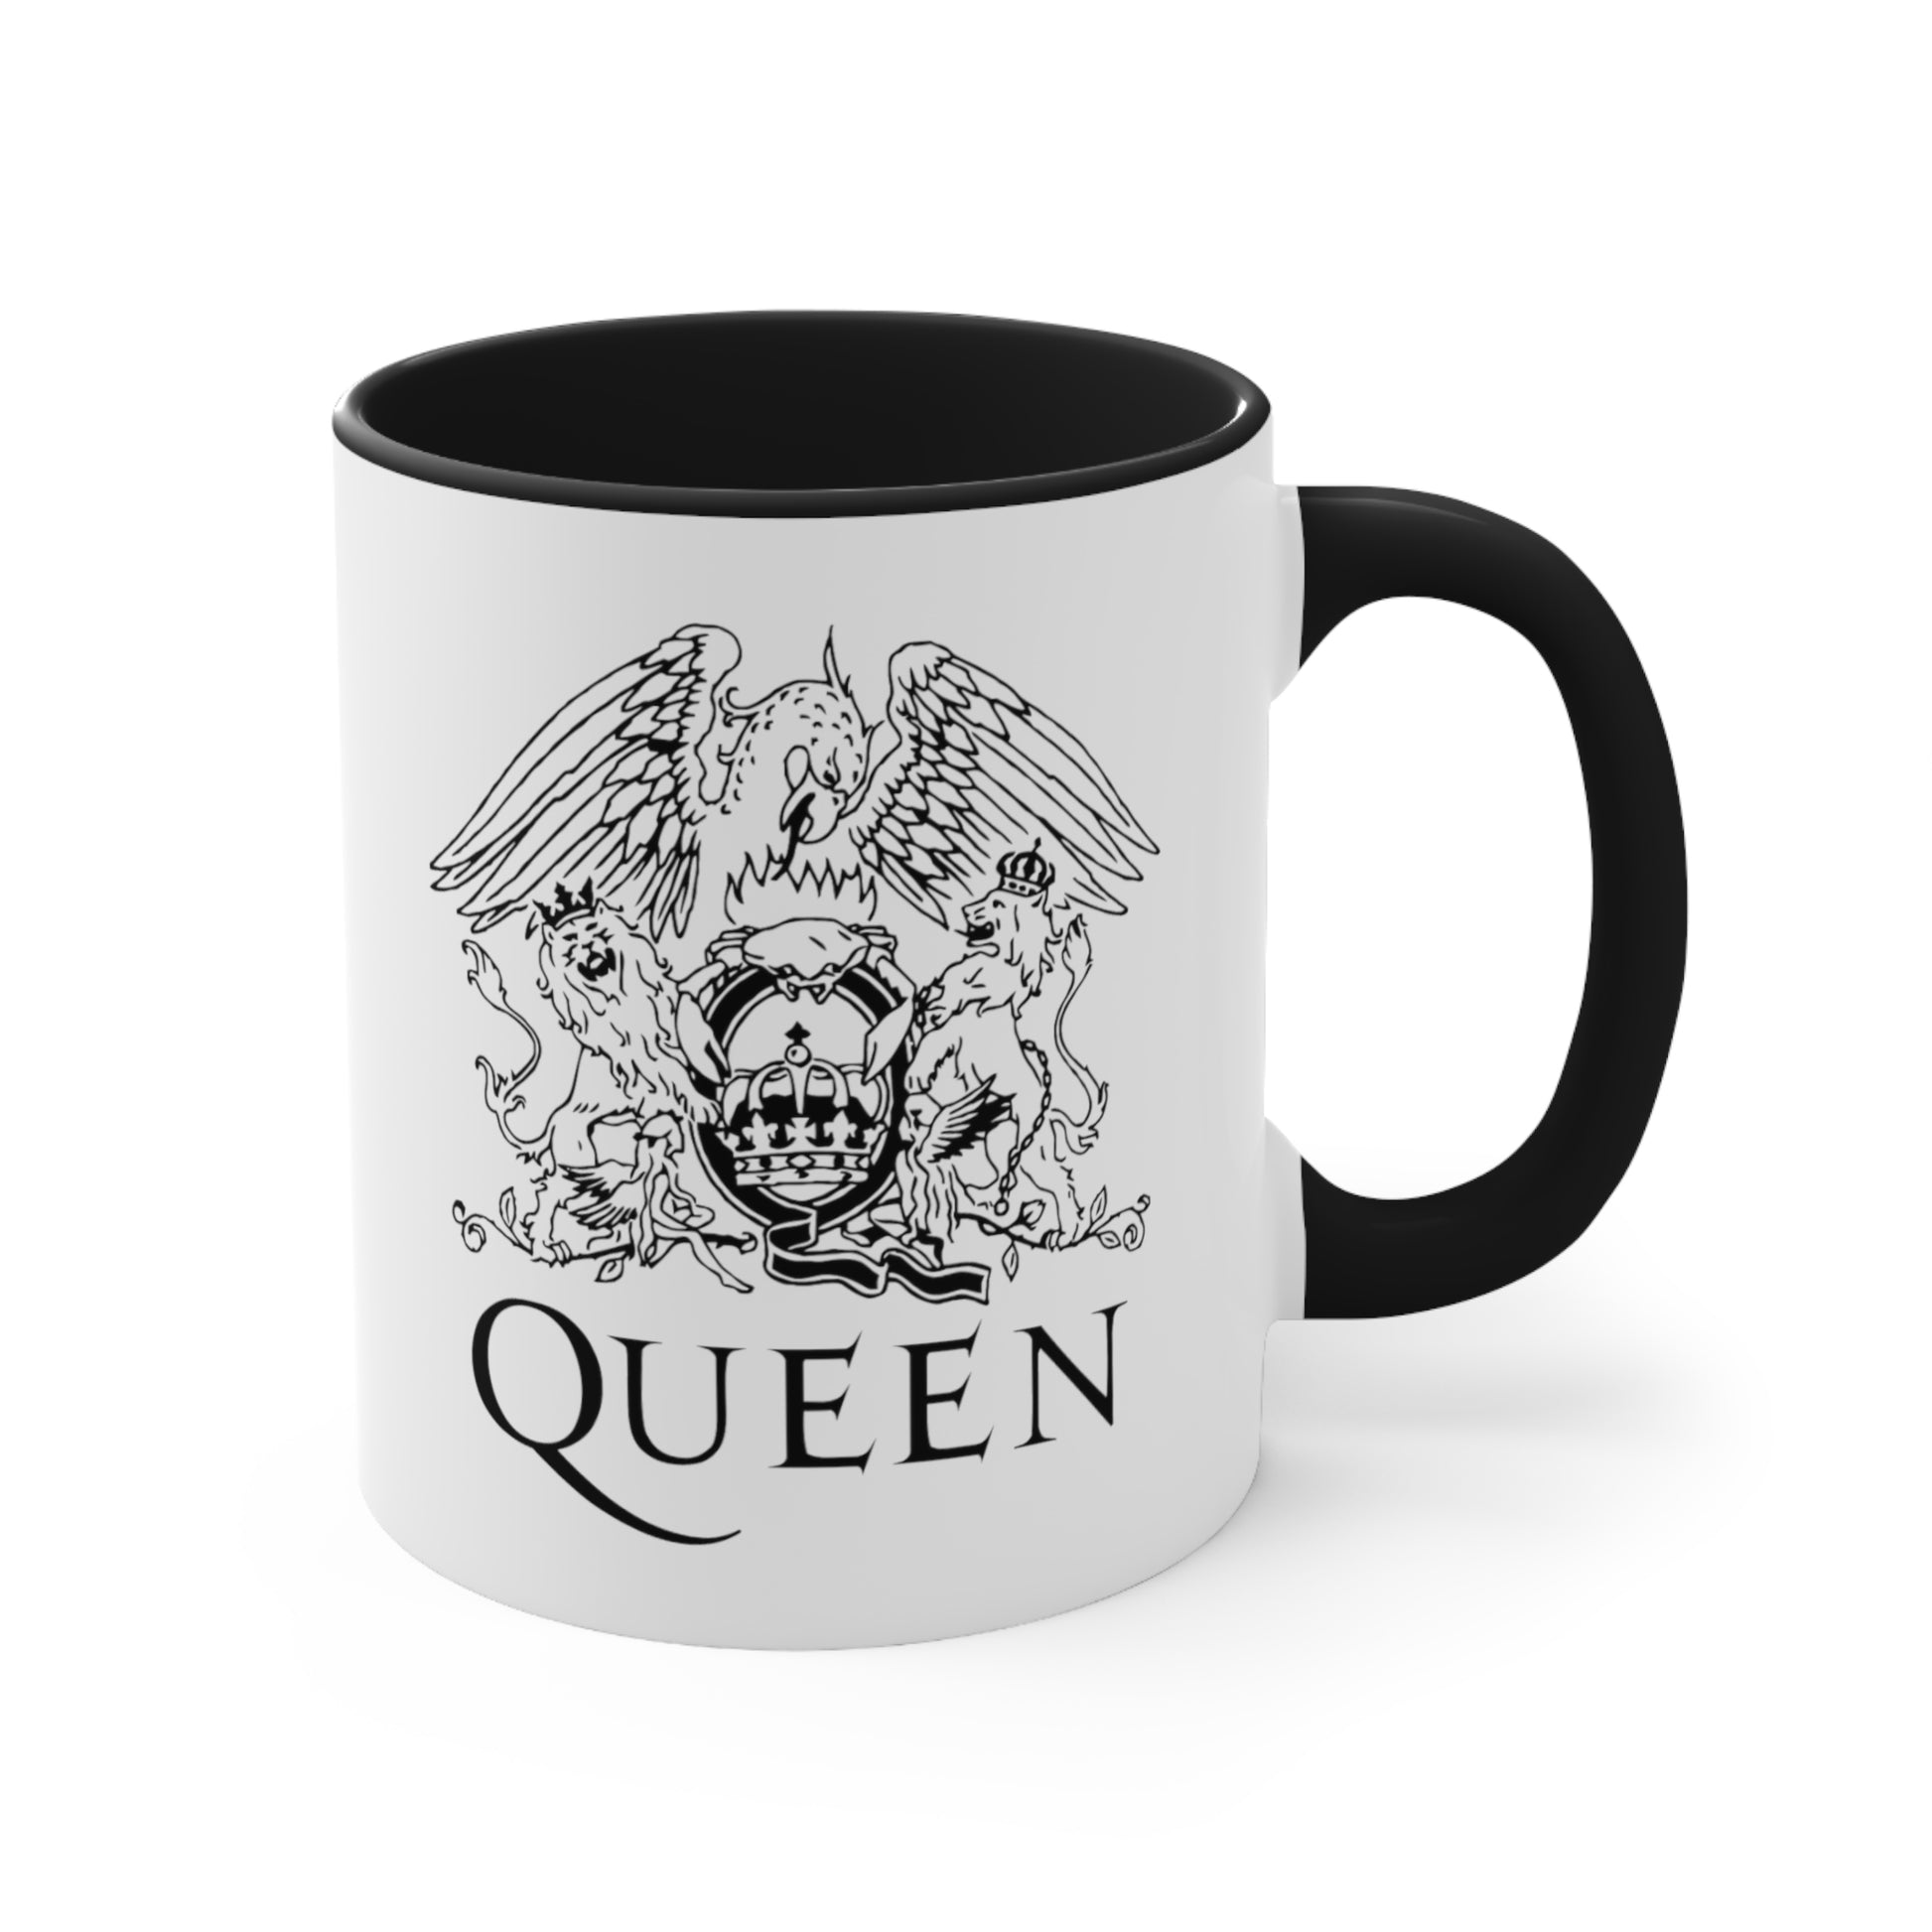 Queen Coffee Mug - Double Sided Black Accent White Ceramic  11oz by TheGlassyLass